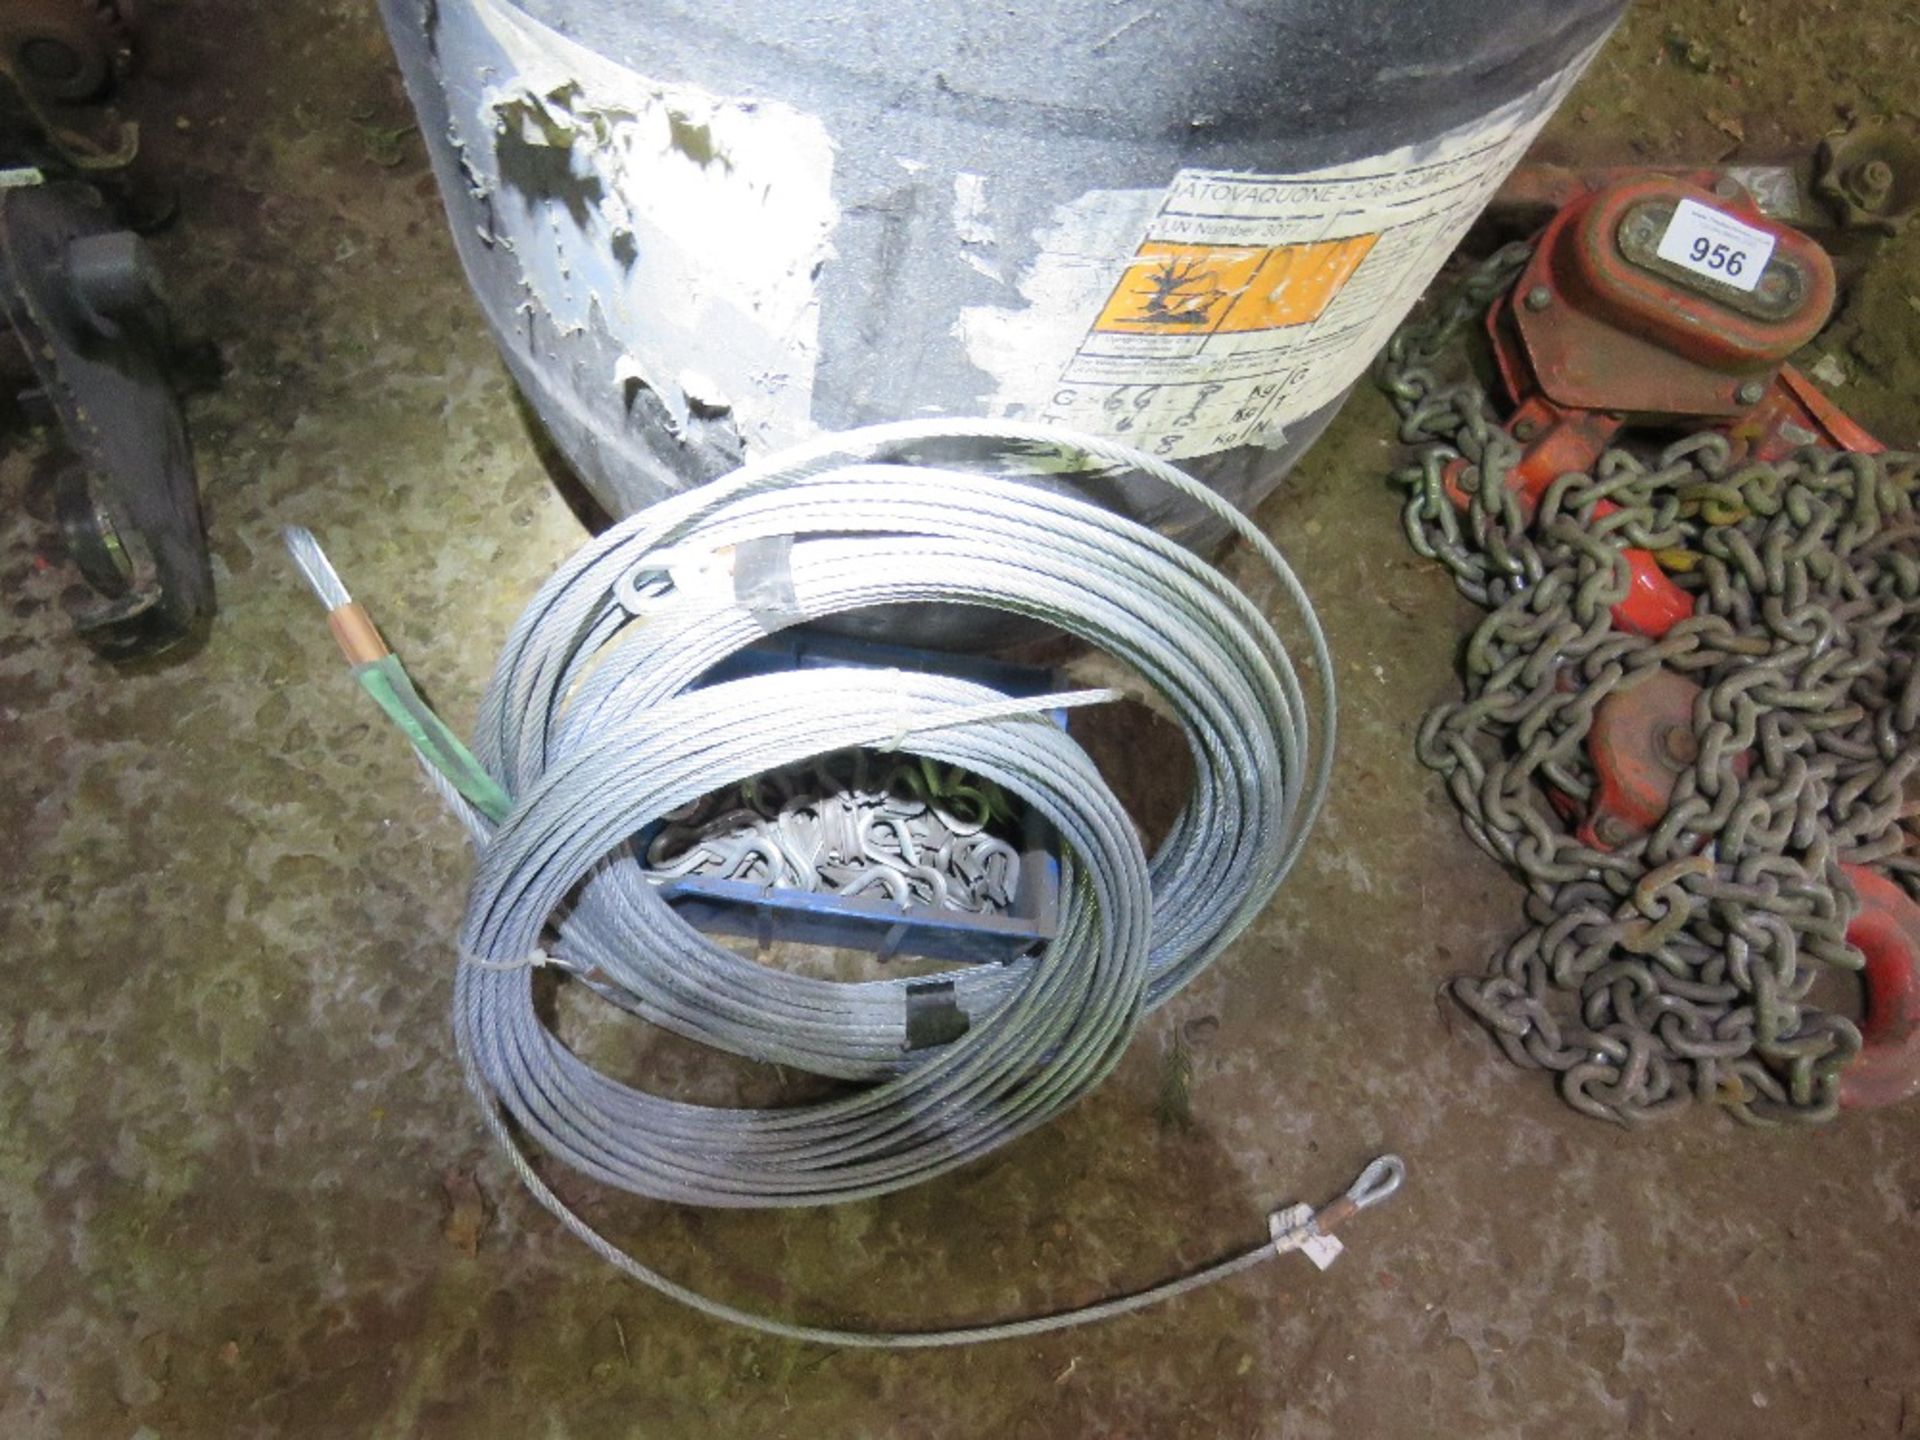 DRUM CONTAINING CABLE HAWSERS PLUS BOX OF EYE INSERTS ETC. SOURCED FROM DEPOT CLEARANCE. - Image 2 of 4